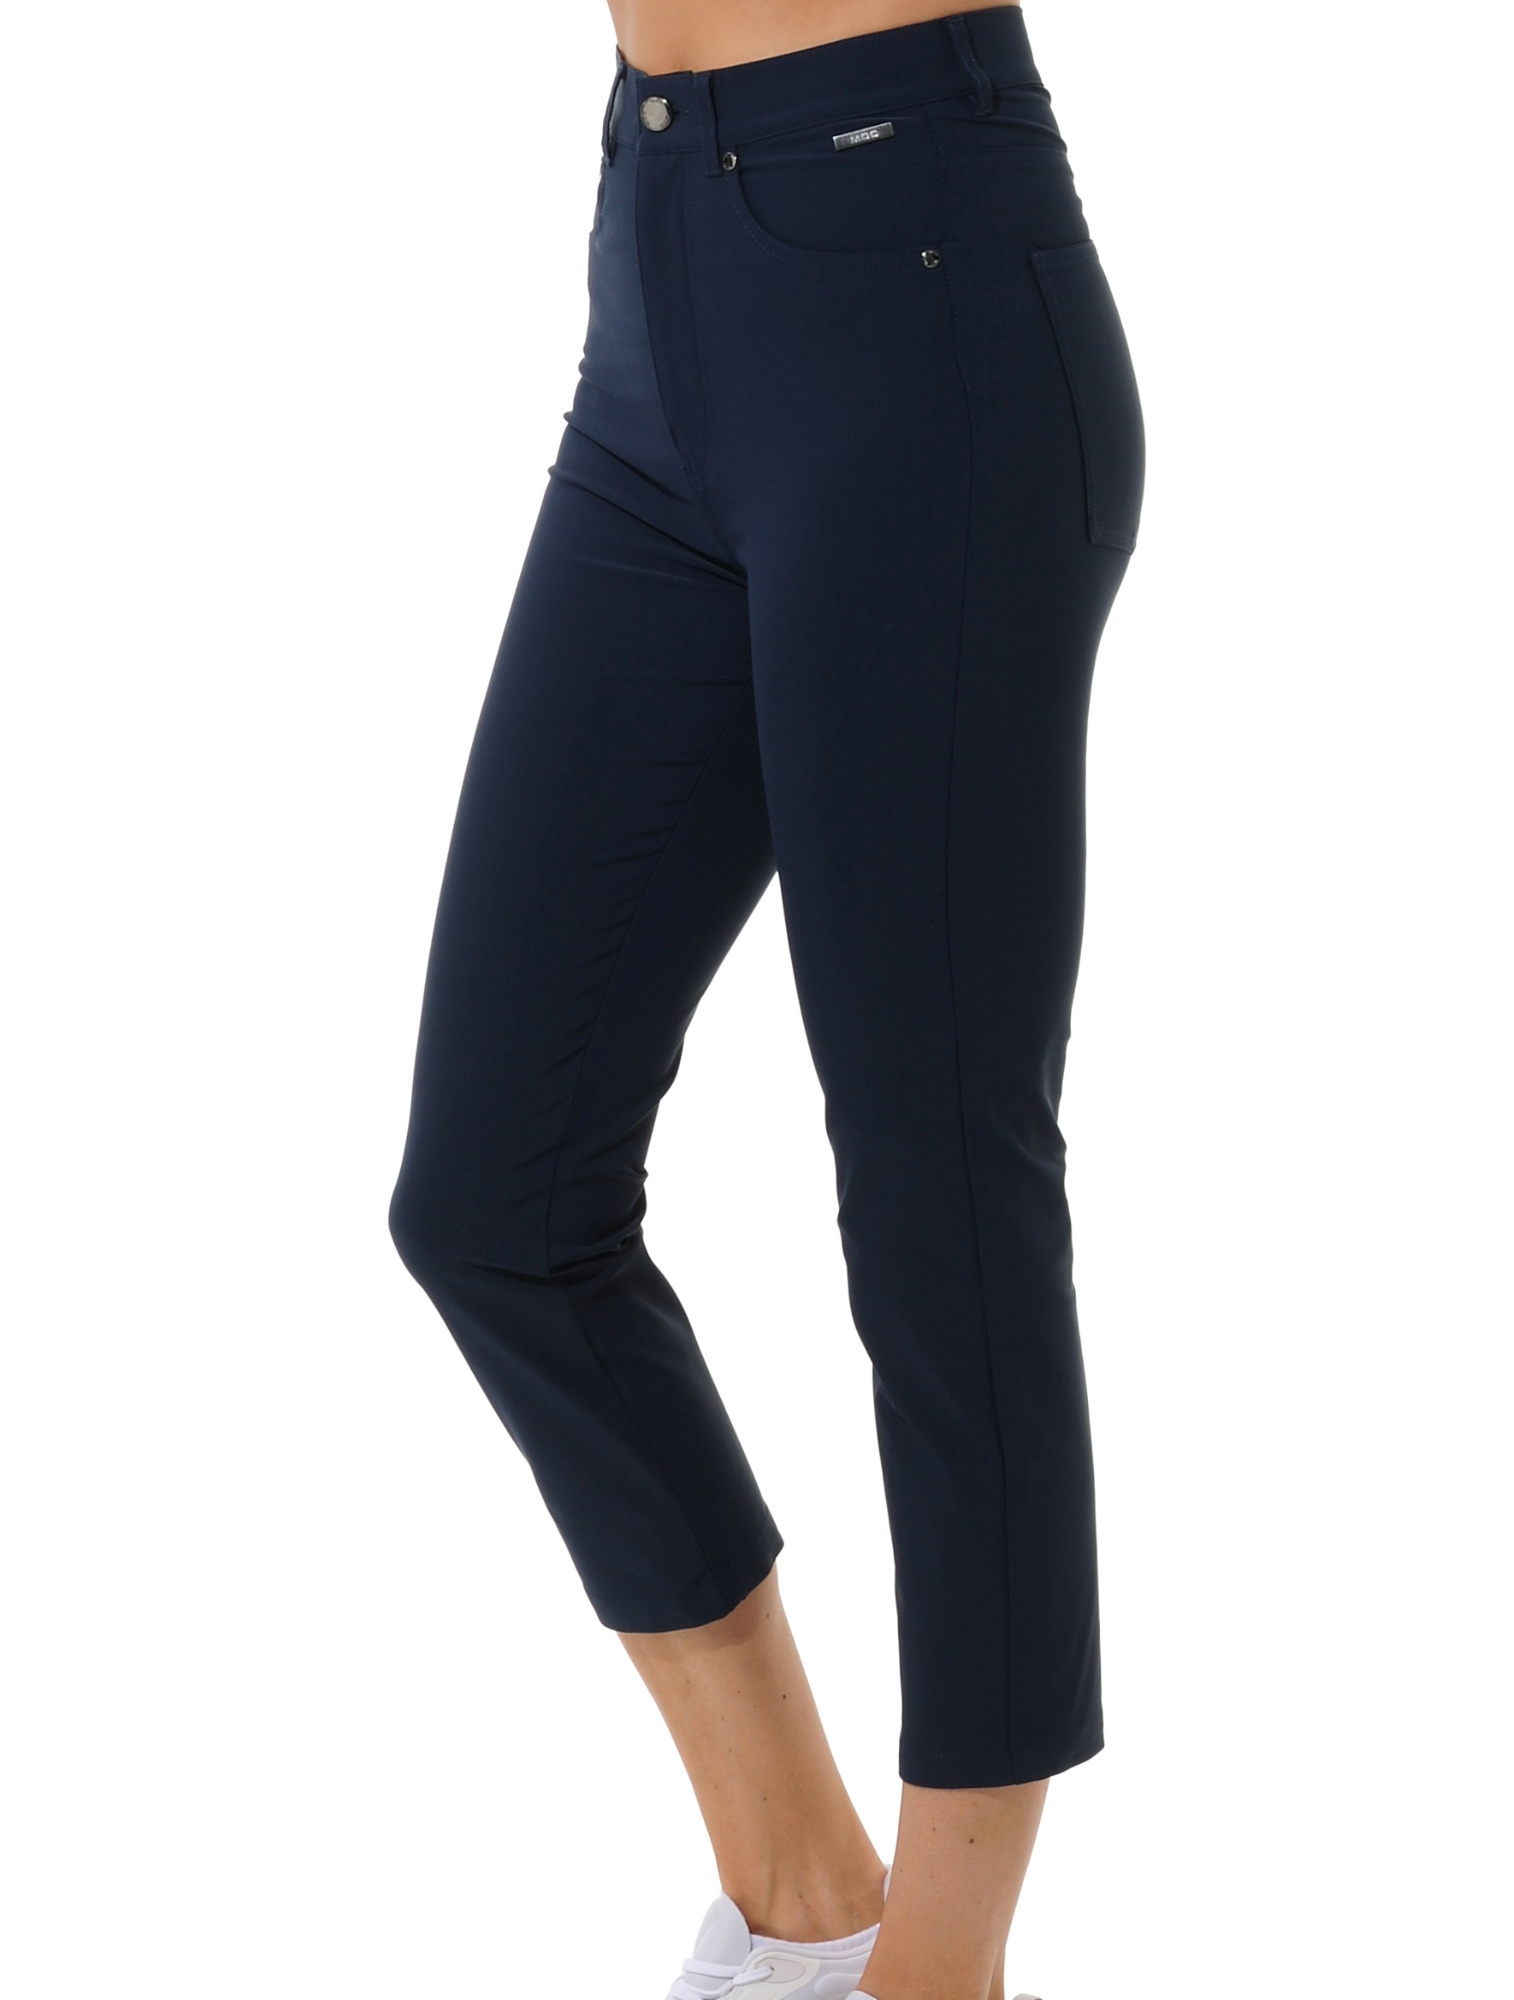 4way stretch high waist cropped pants navy 